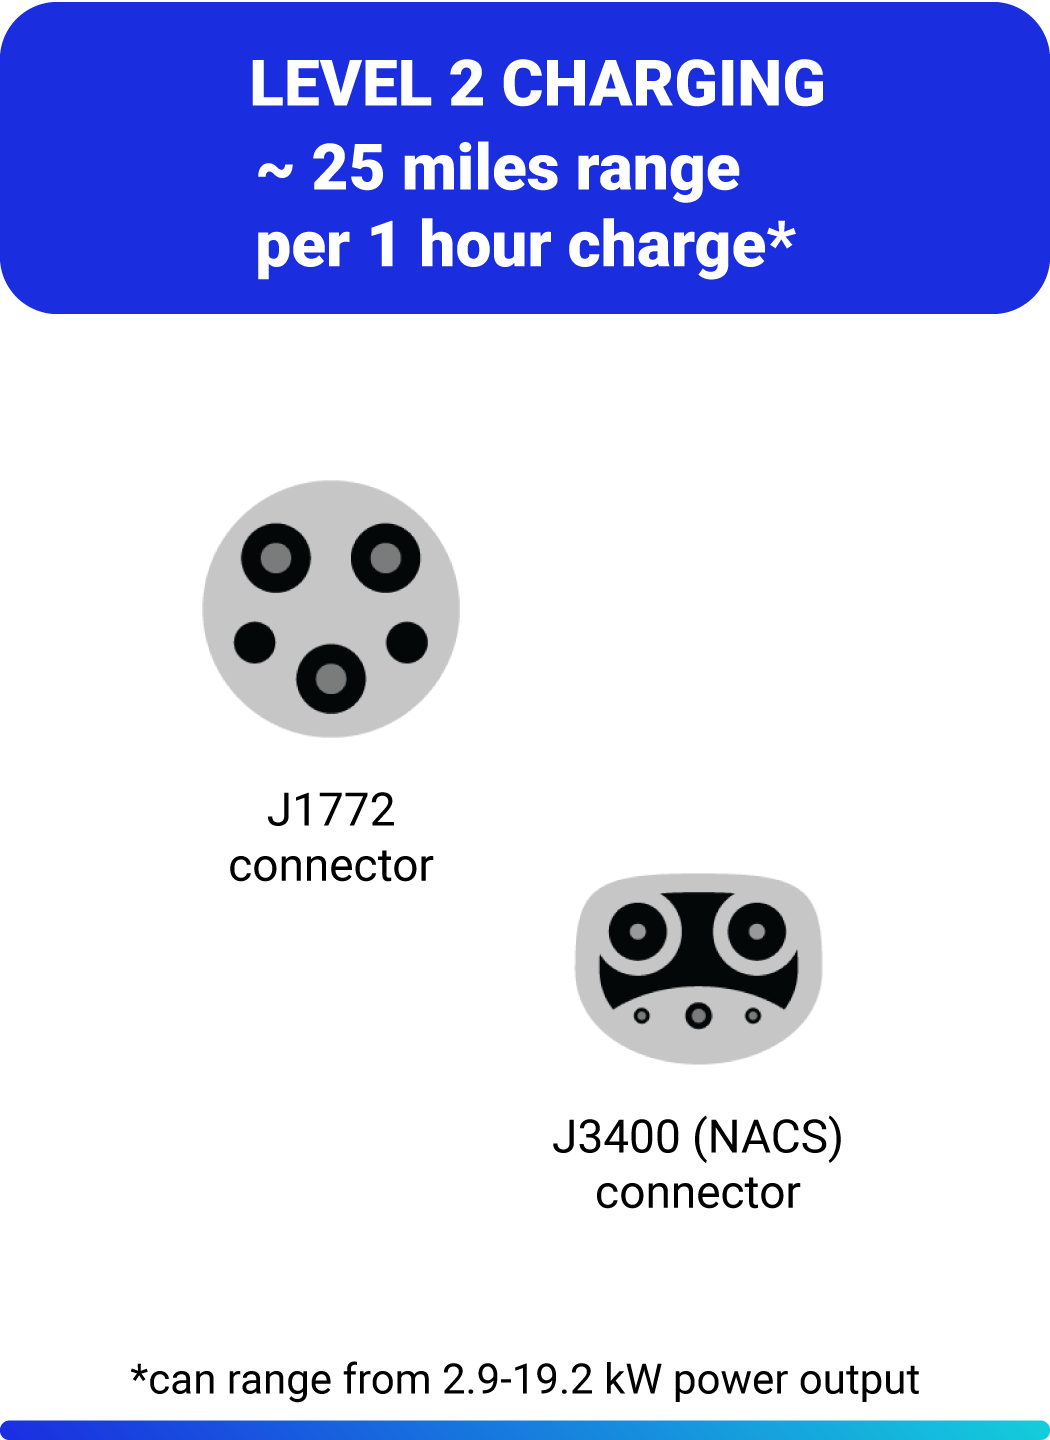 image of level 2 charging connectors